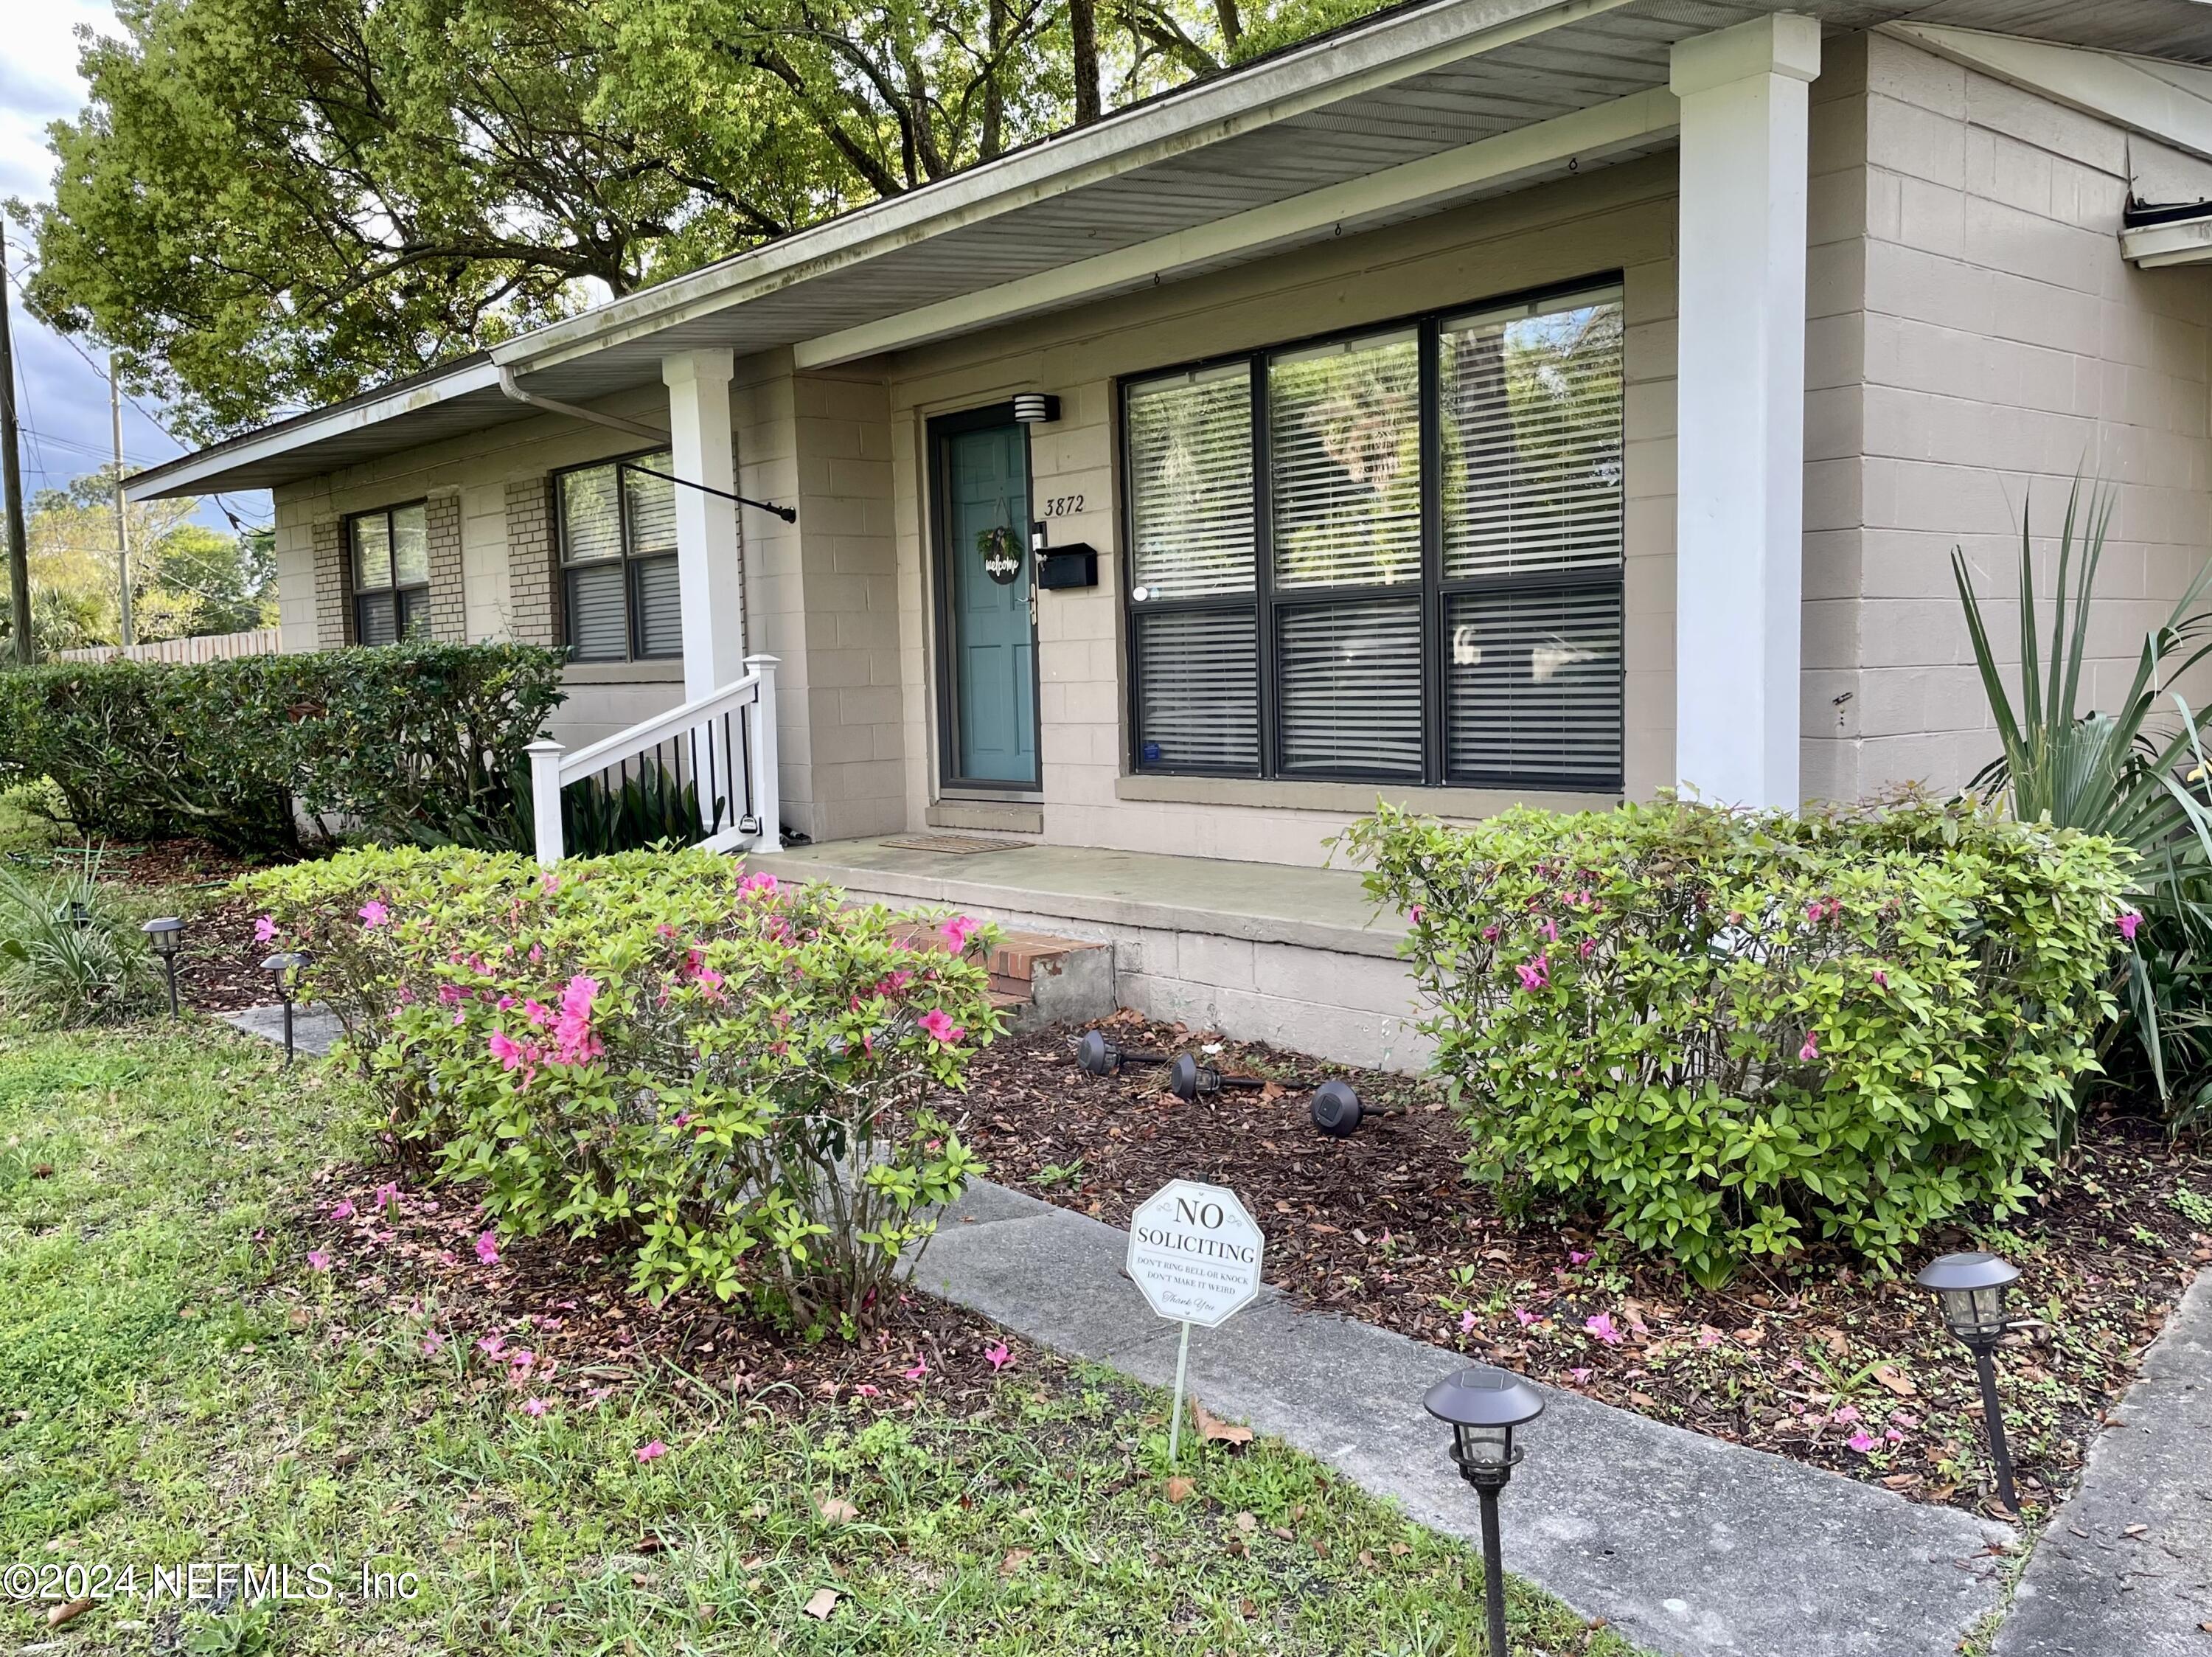 Jacksonville, FL home for sale located at 3872 Marianna Road, Jacksonville, FL 32217